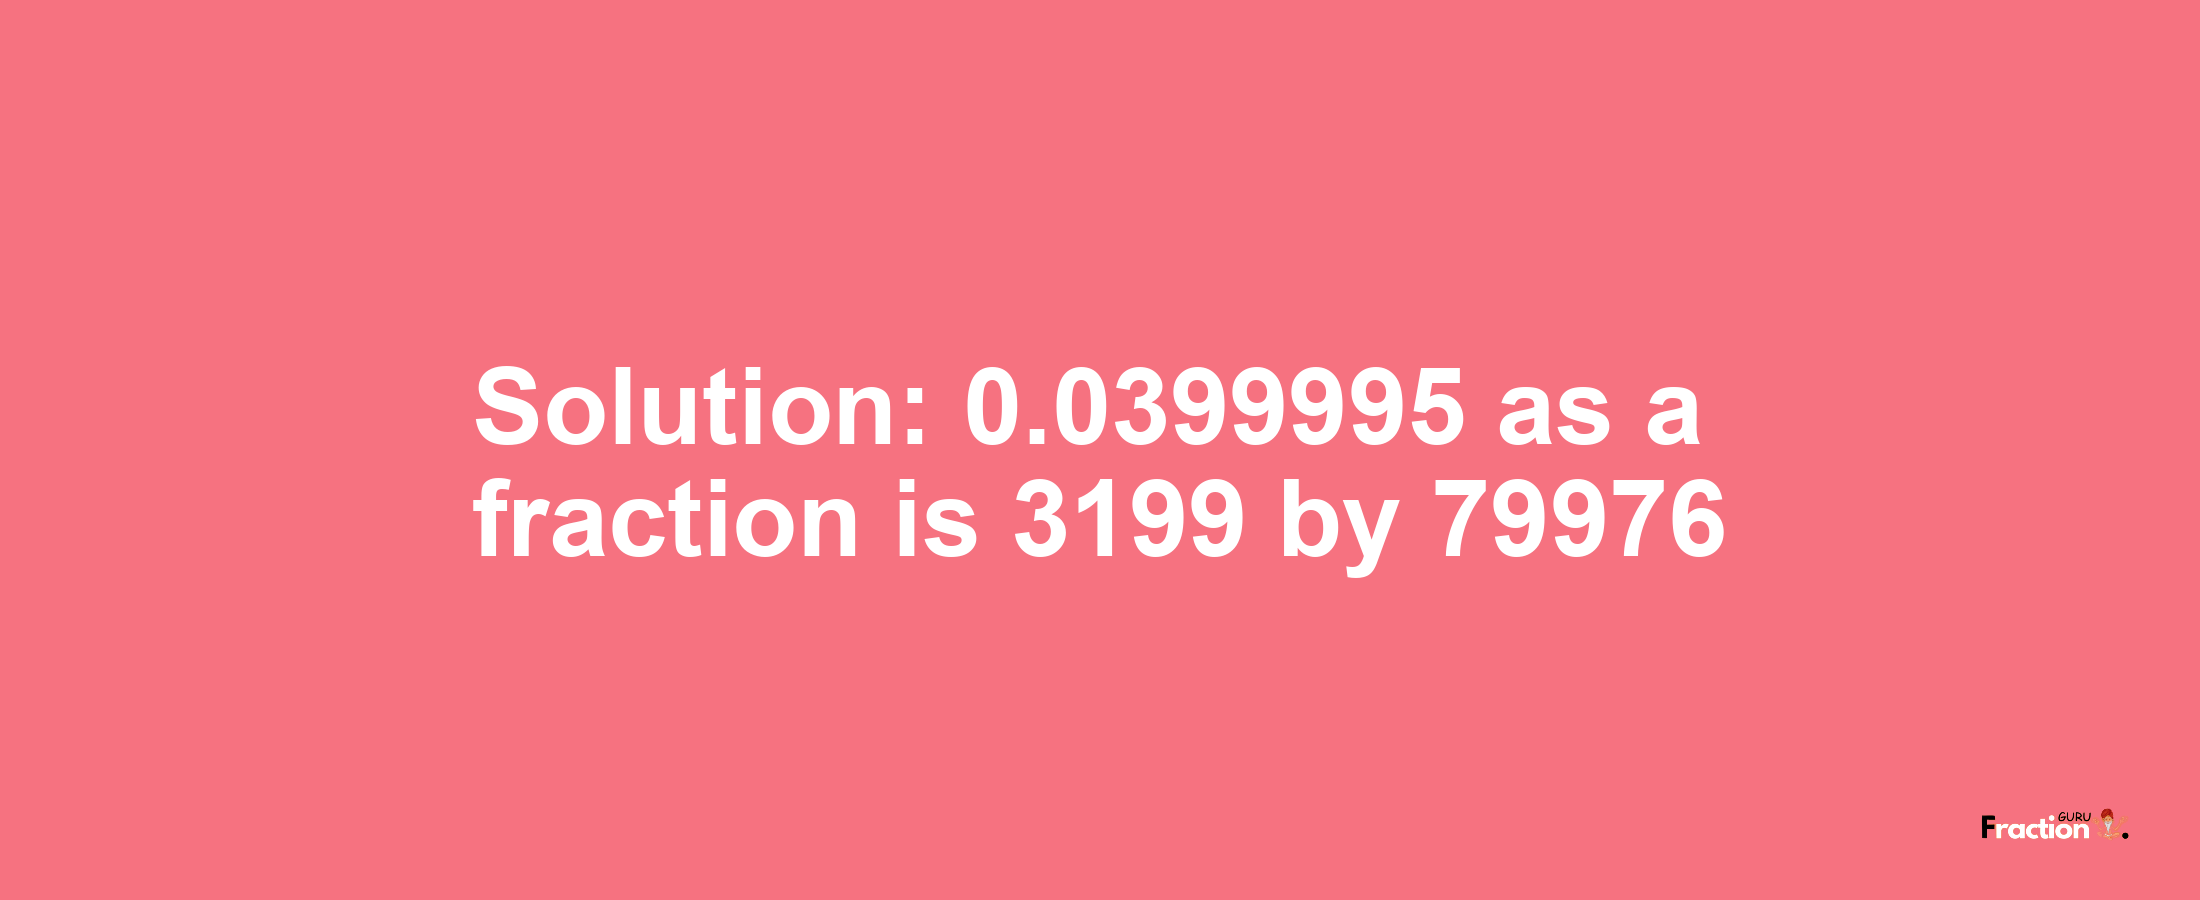 Solution:0.0399995 as a fraction is 3199/79976